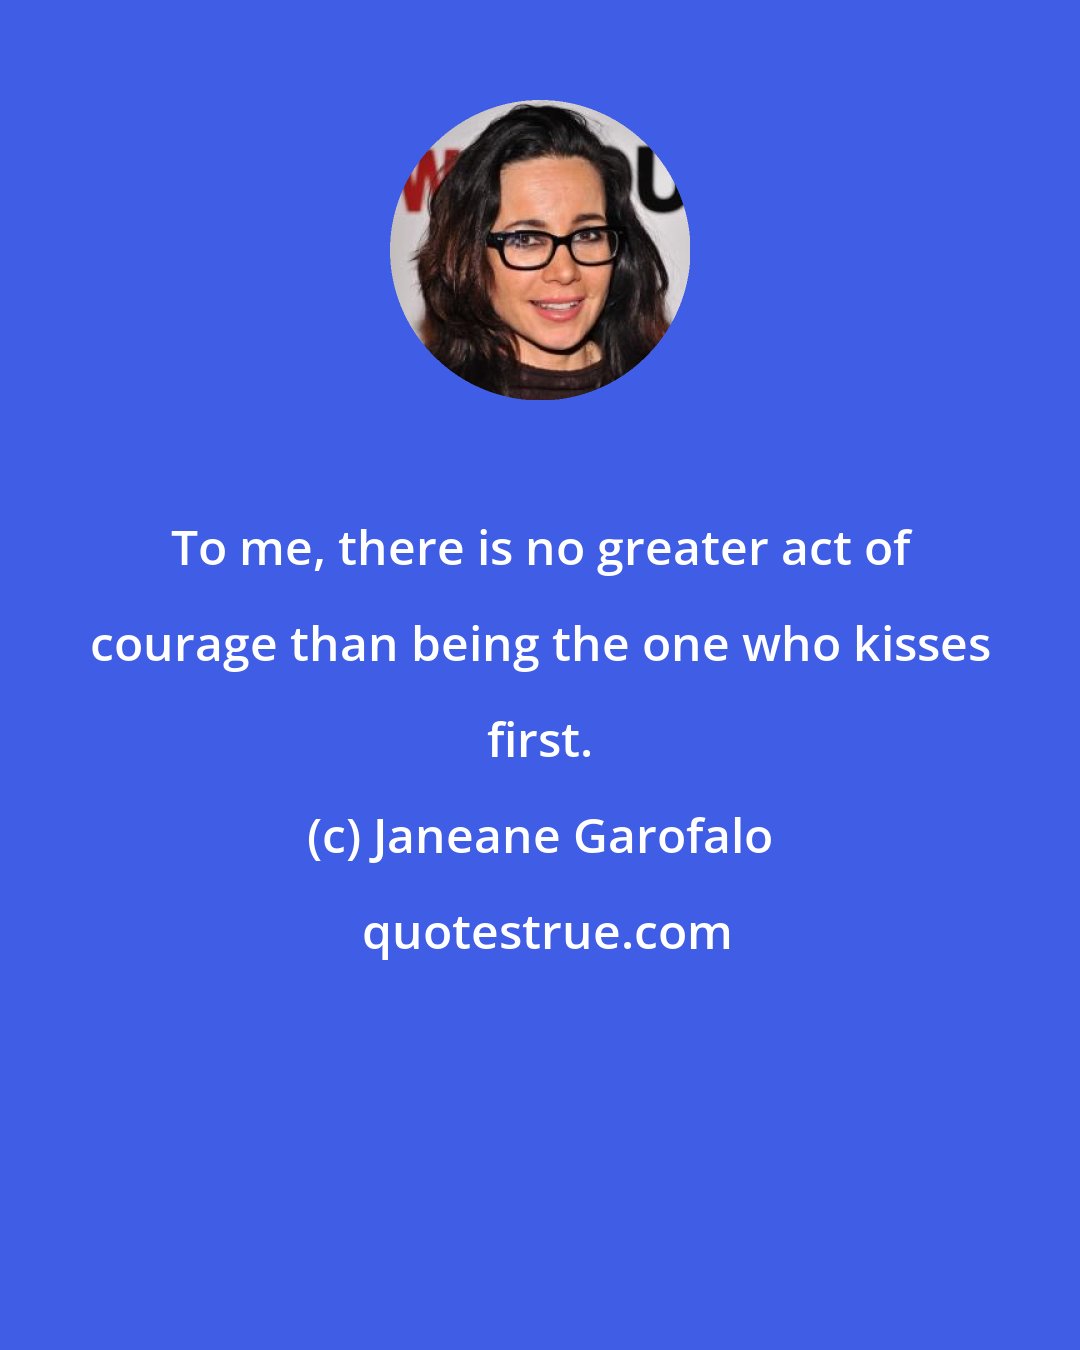 Janeane Garofalo: To me, there is no greater act of courage than being the one who kisses first.